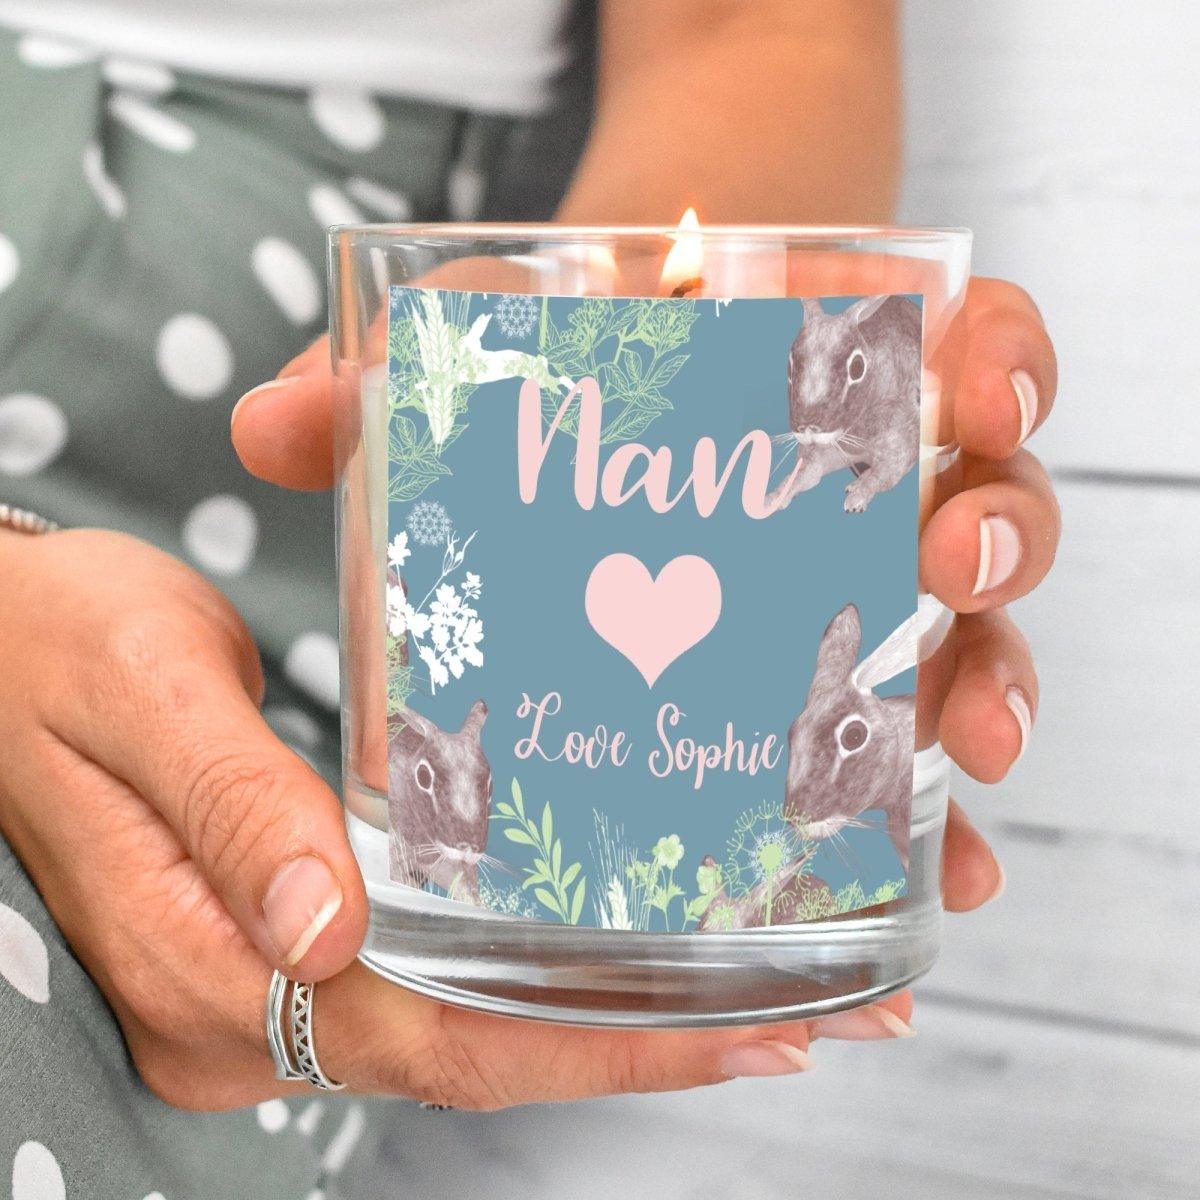 Nanny Gift Candle, Personalised Candle, Nanny Gift, Candle in Jar, Custom Candle Best Friend Candle, Candle Gifts, Nanny Gift, Nanny - Amy Lucy